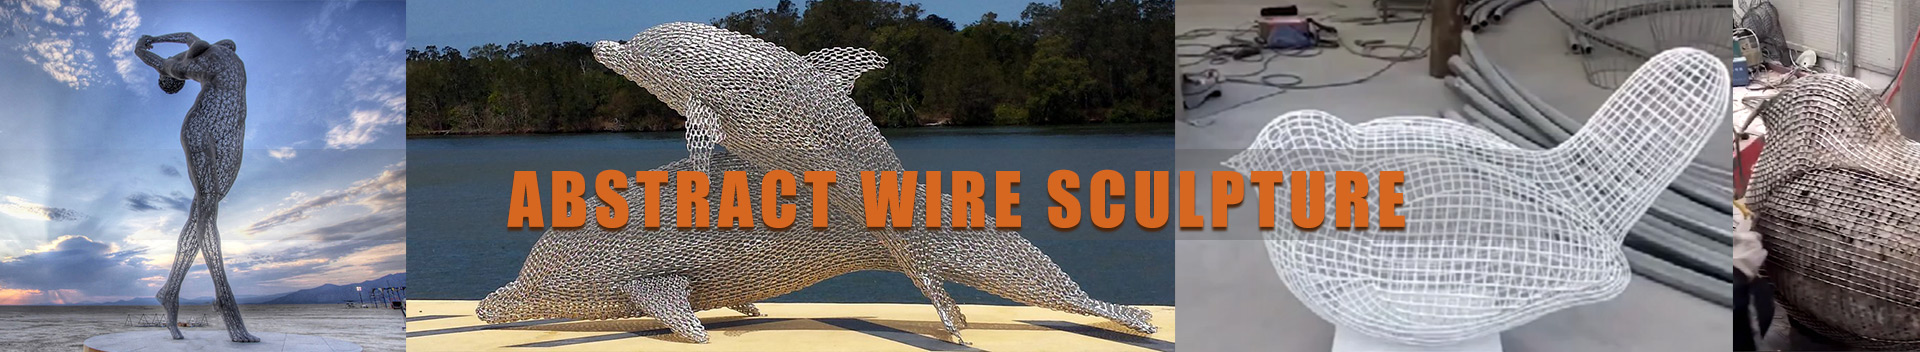 Abstract wire sculpture  Art Metal Sculpture abstract wire sculpture